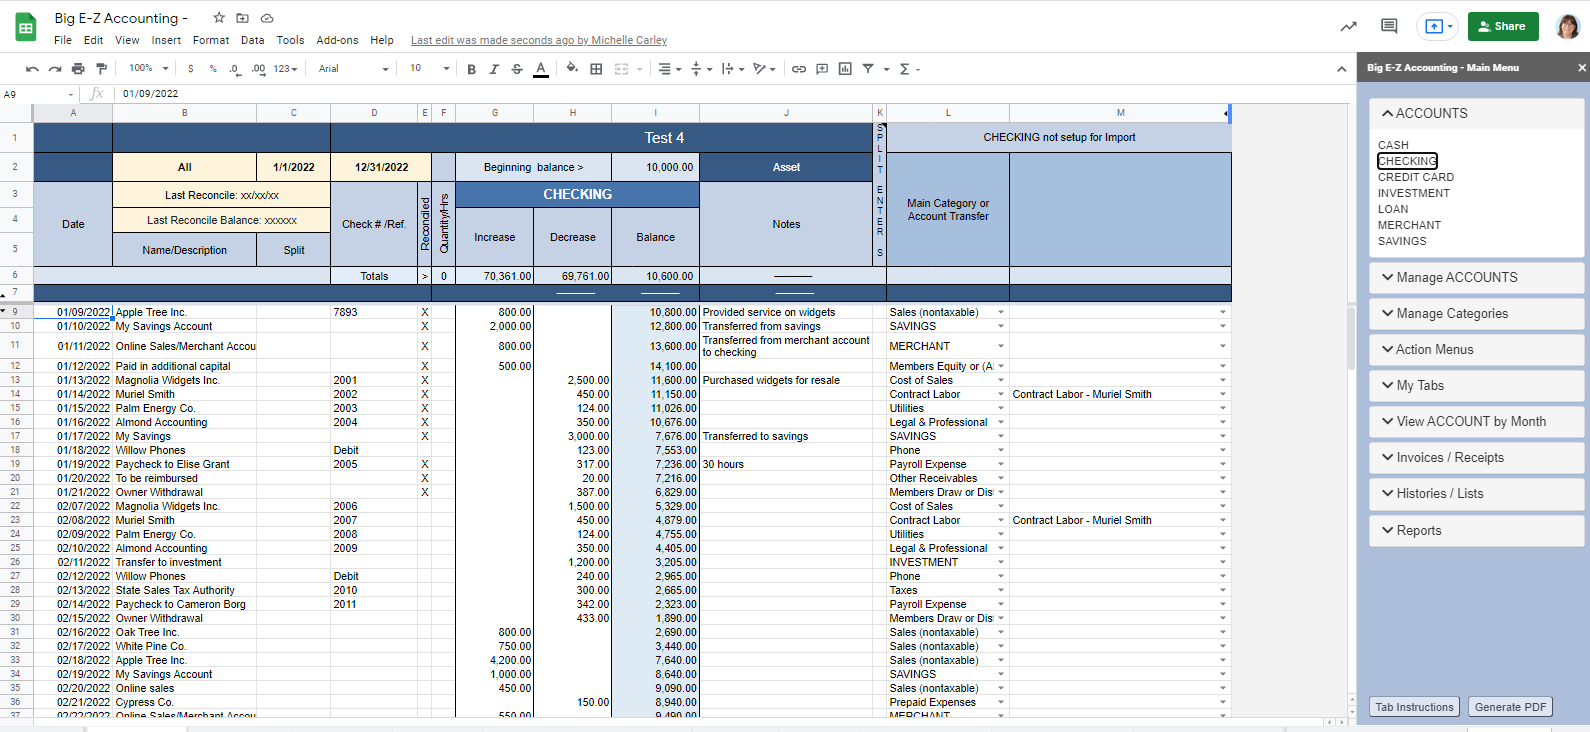 Big E-Z Accounting for Google Sheets Software - 1